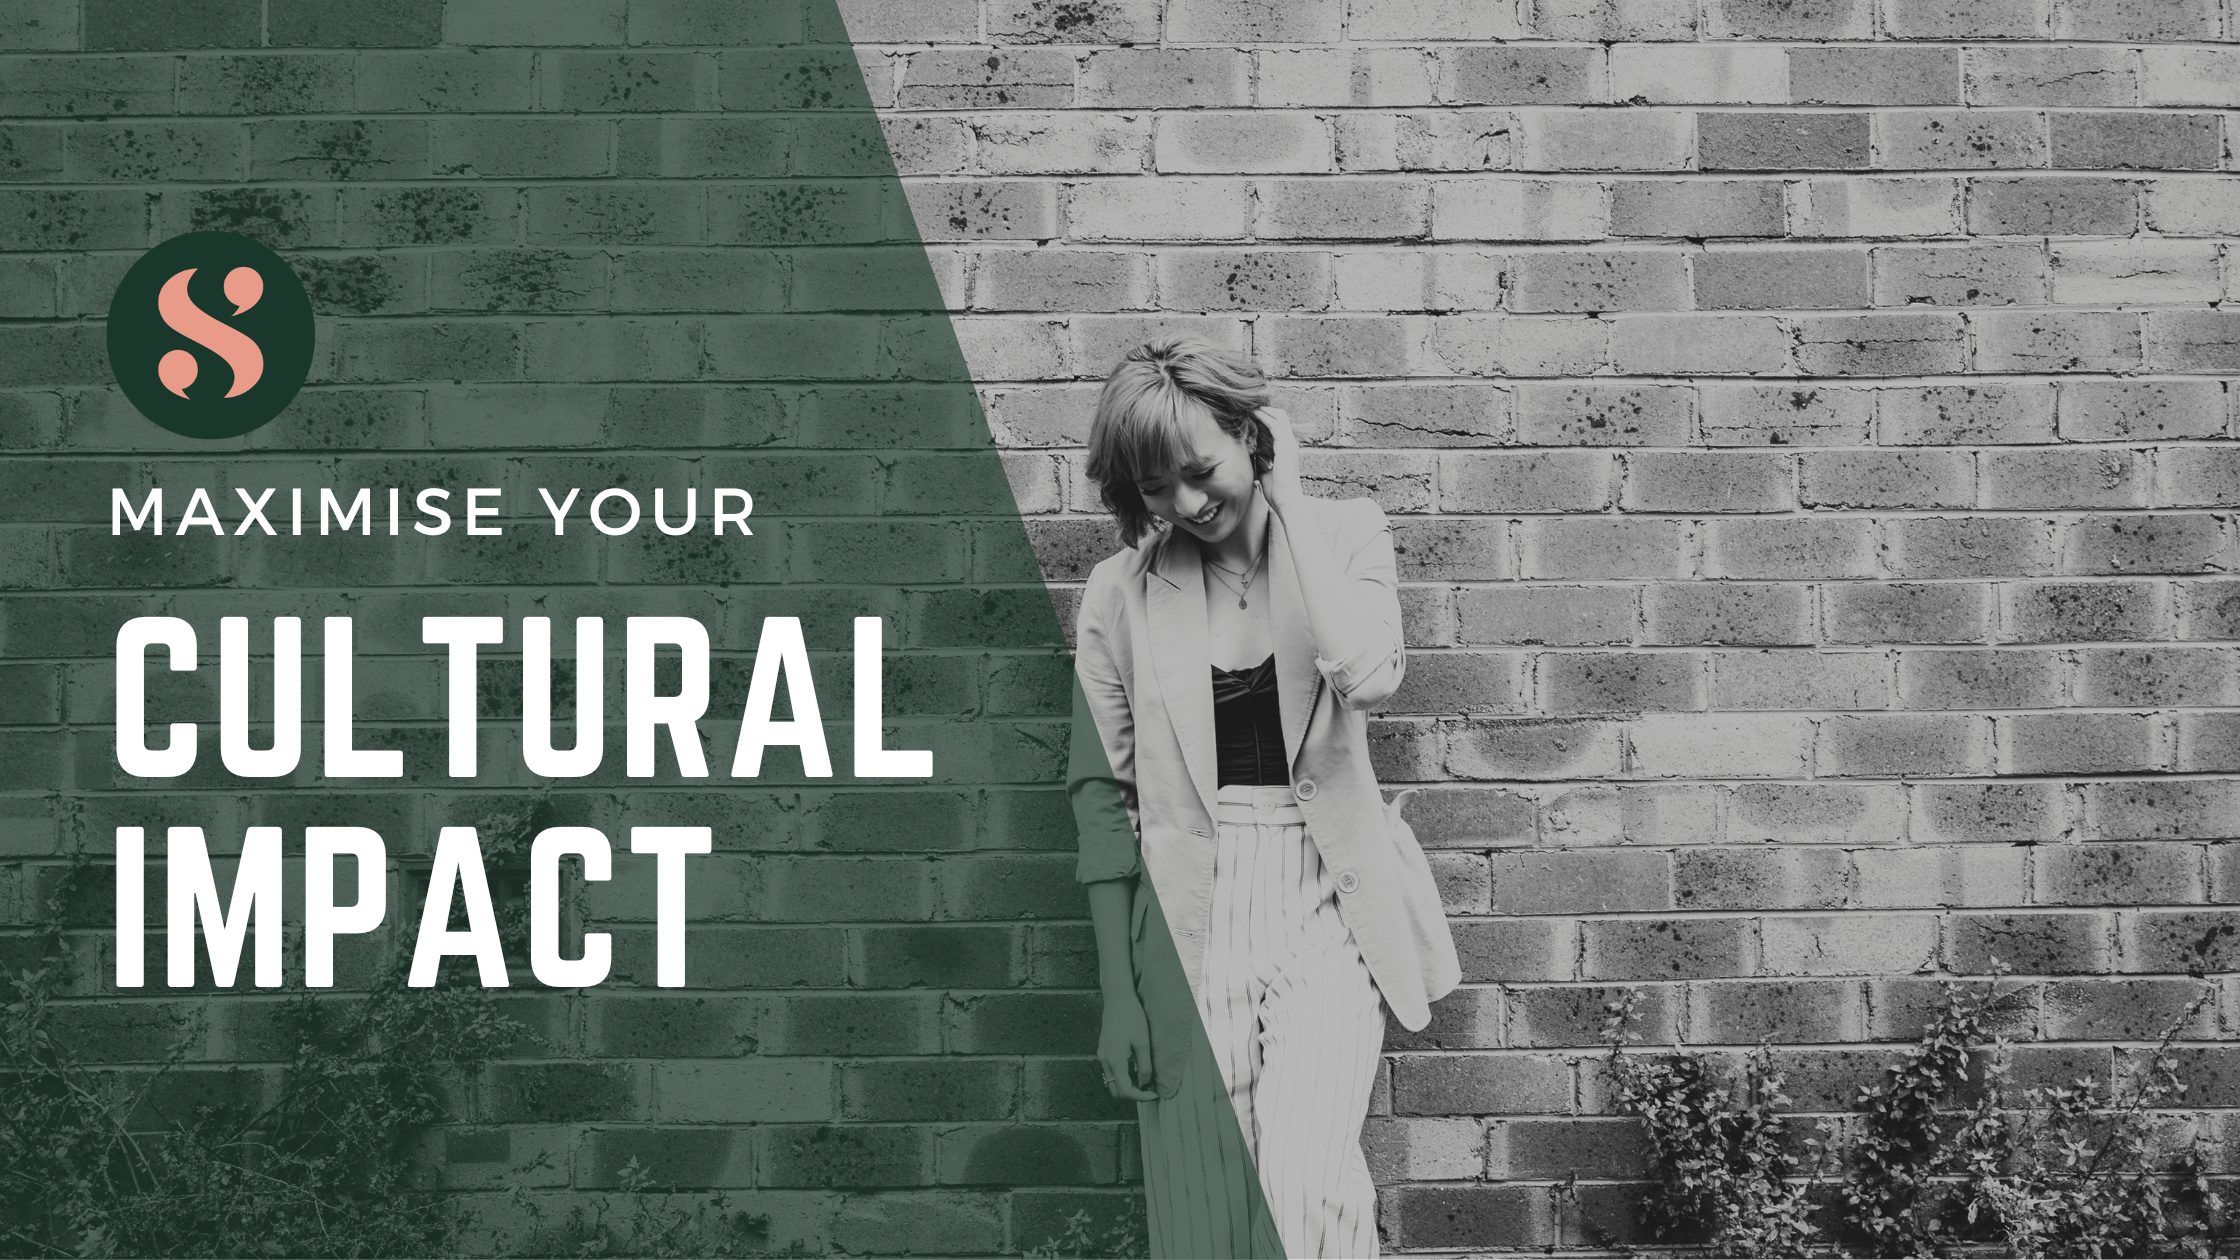 Maximise Your Cultural Impact. In the background, a girl in a paint suit is smiling as she leans against a brick wall